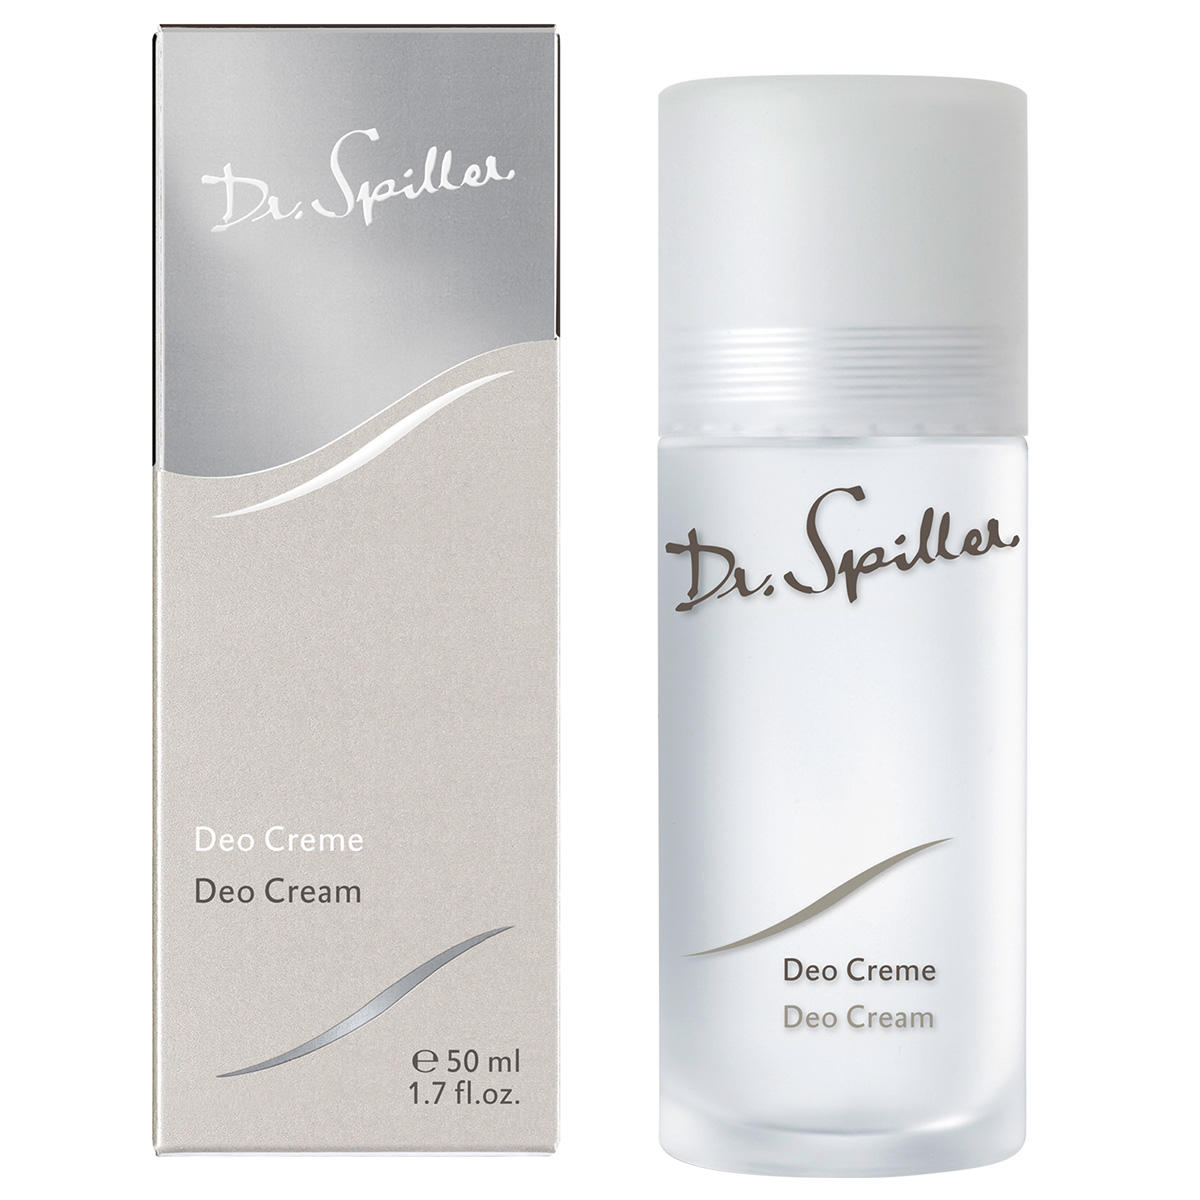 Dr. Spiller Biomimetic SkinCare Deo Creme 50 ml - 2